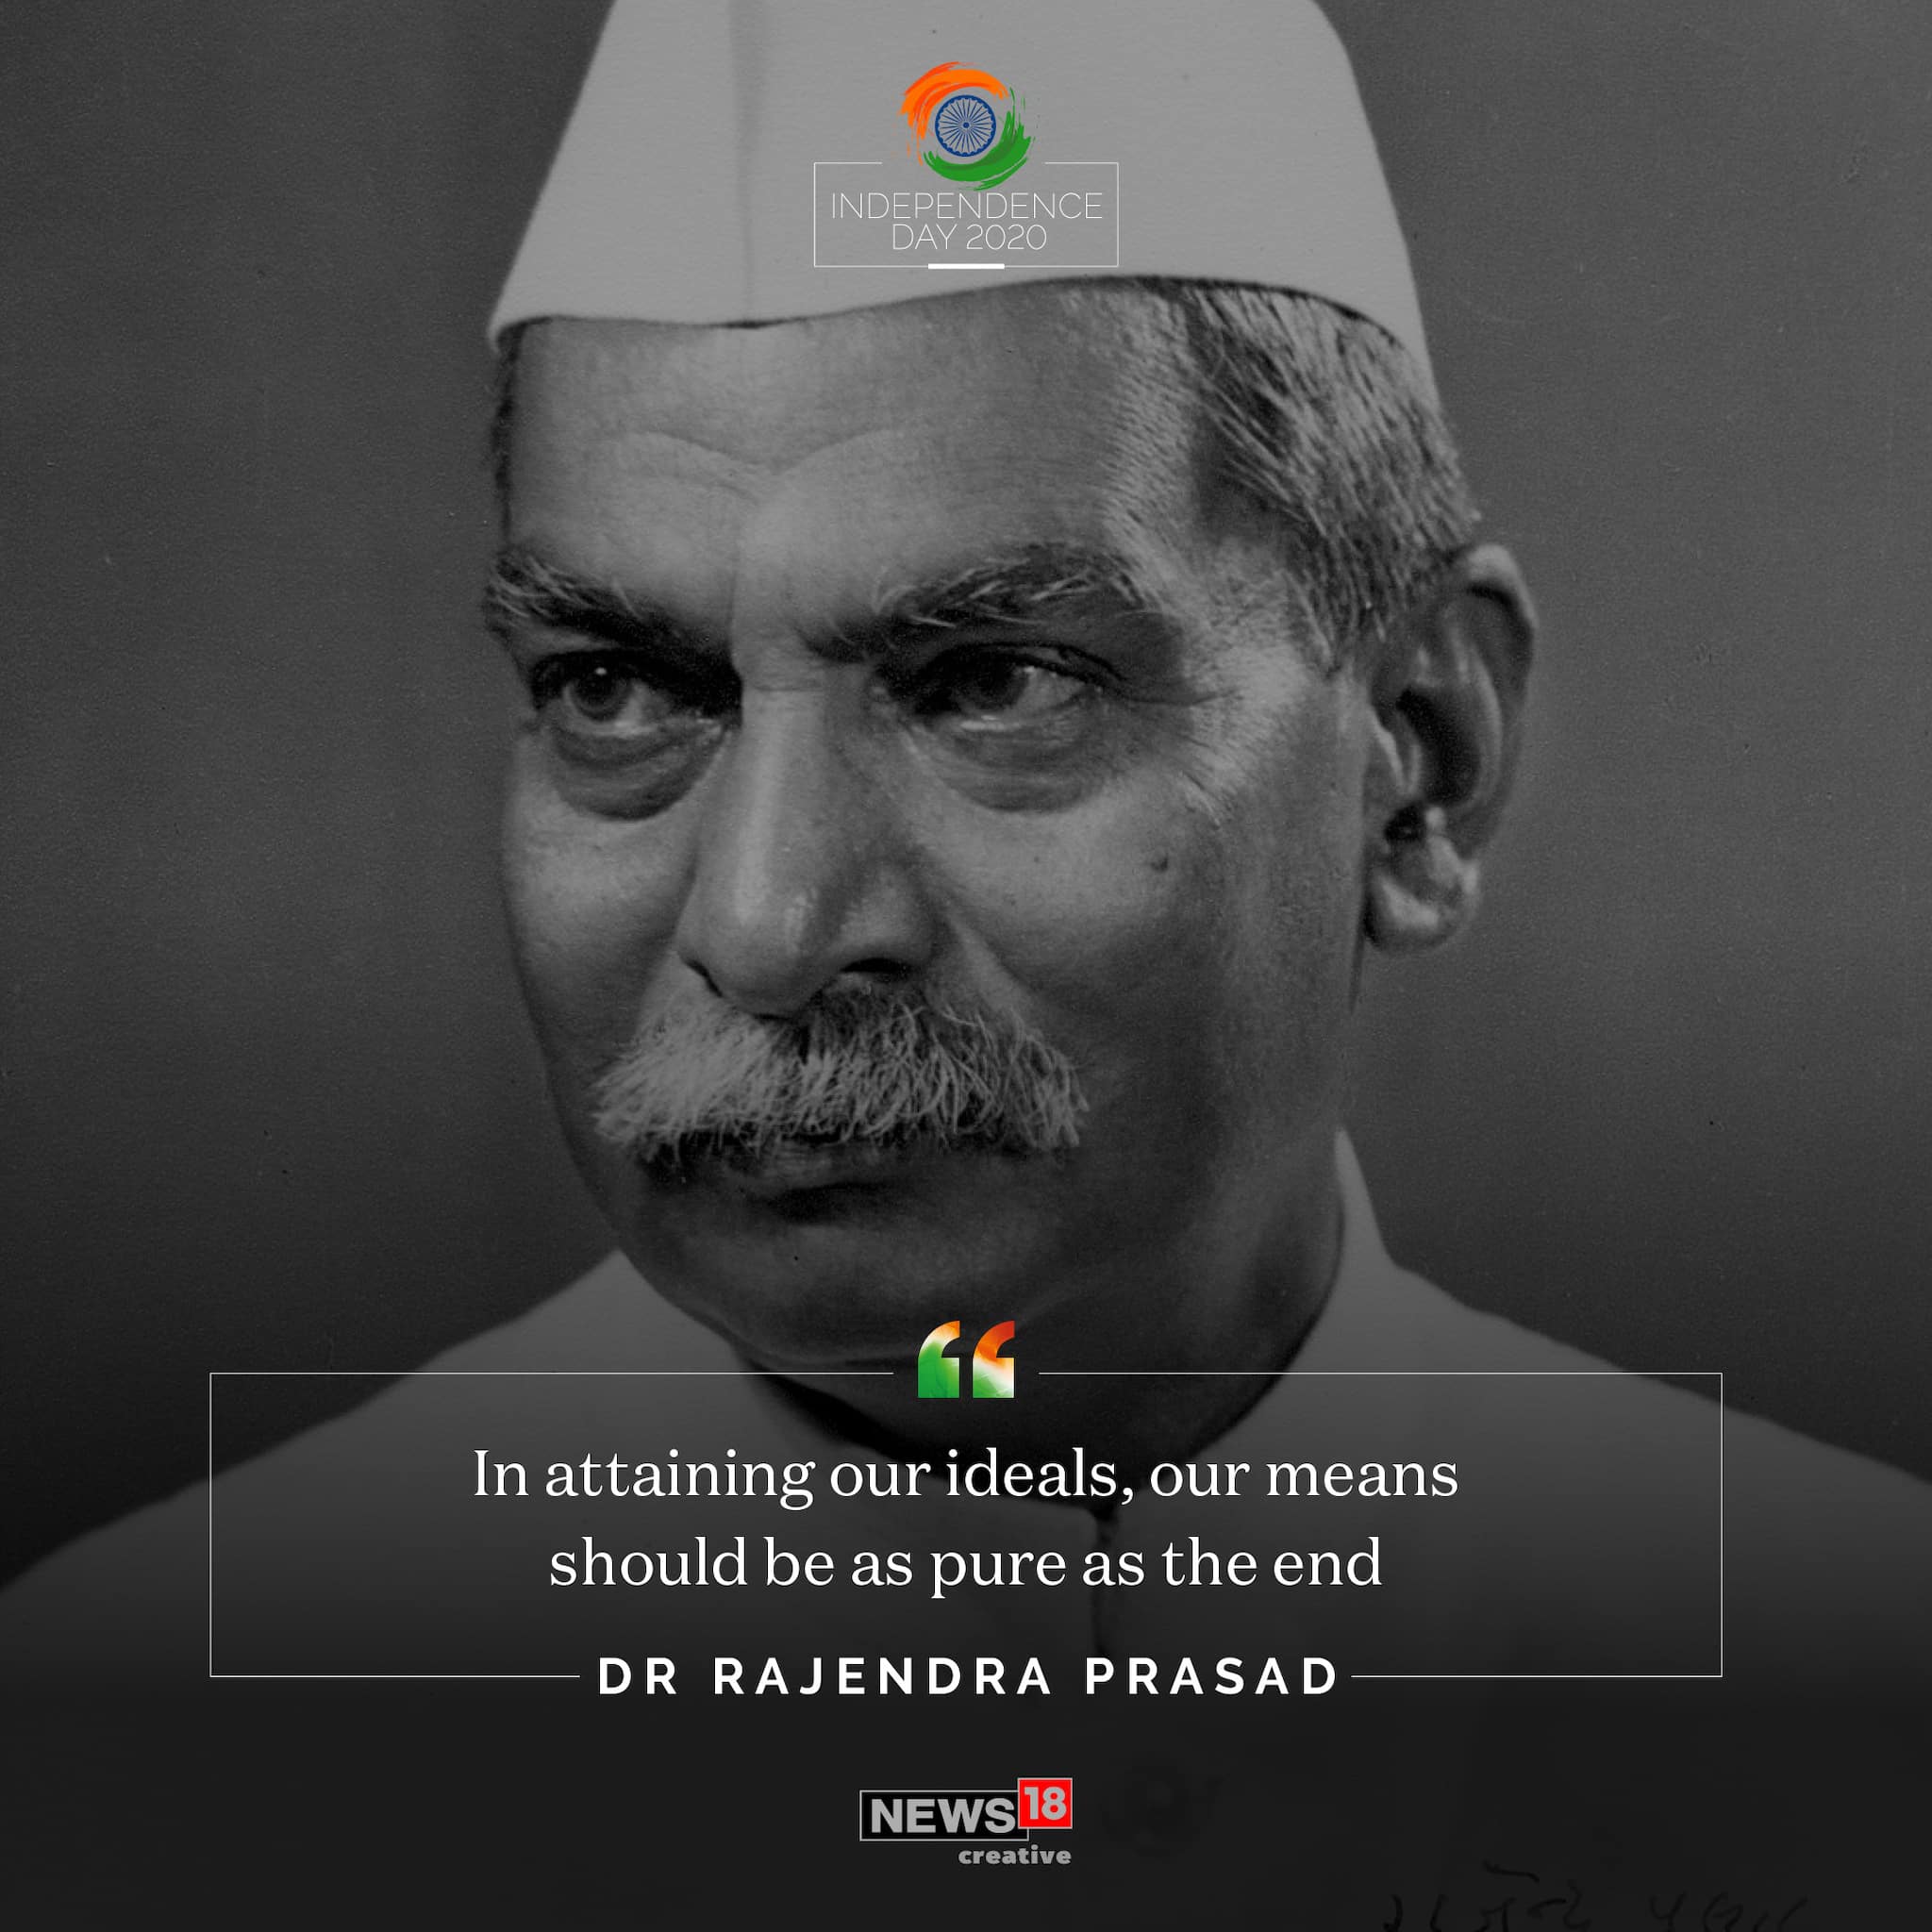 "In attaining our ideals, our means should as pure as the end" quote by first president of India Dr Rajendra Prasad.